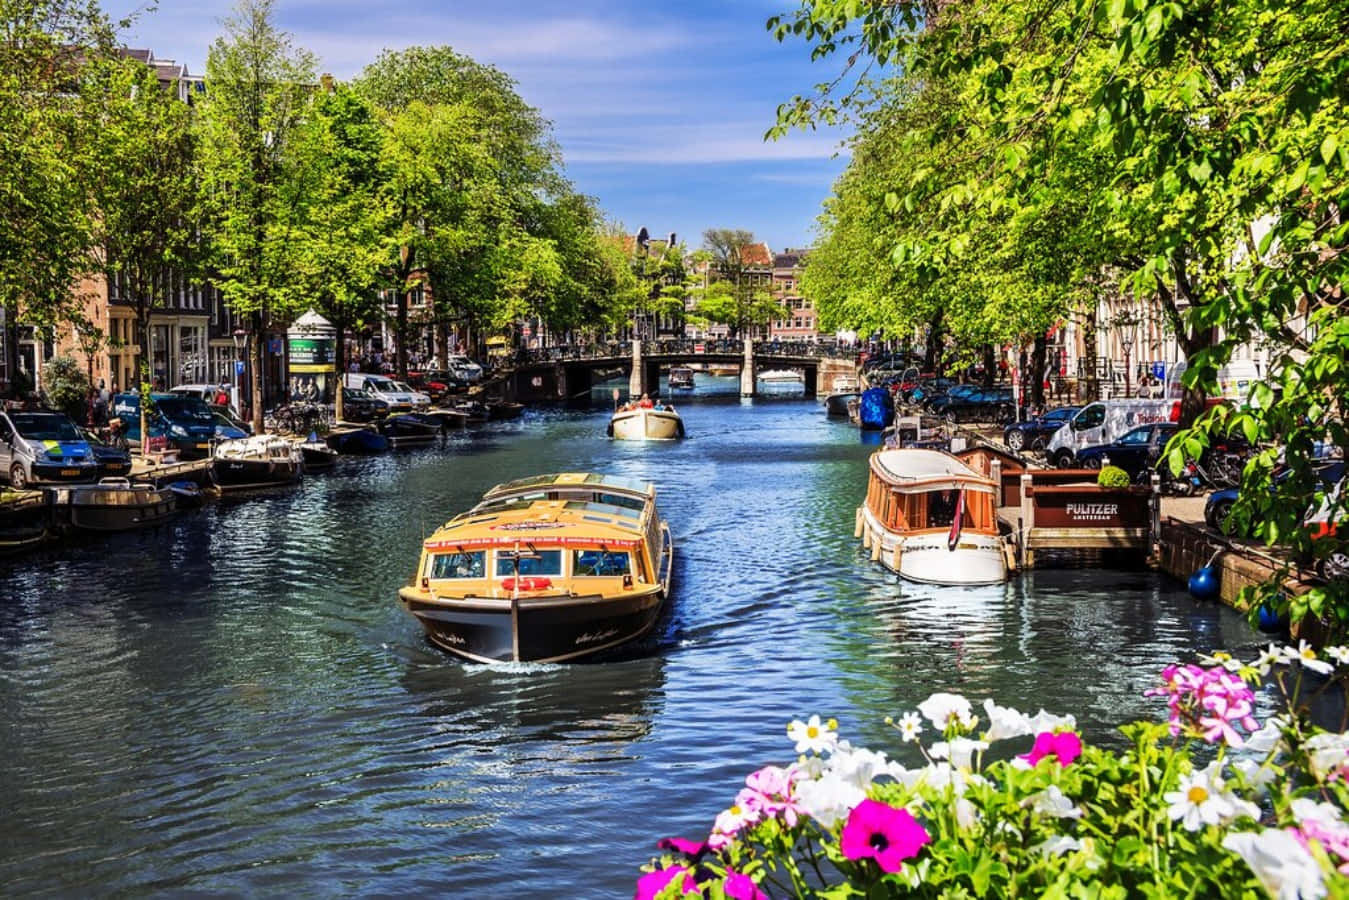 An Enchanting Canal Scene in the Netherlands